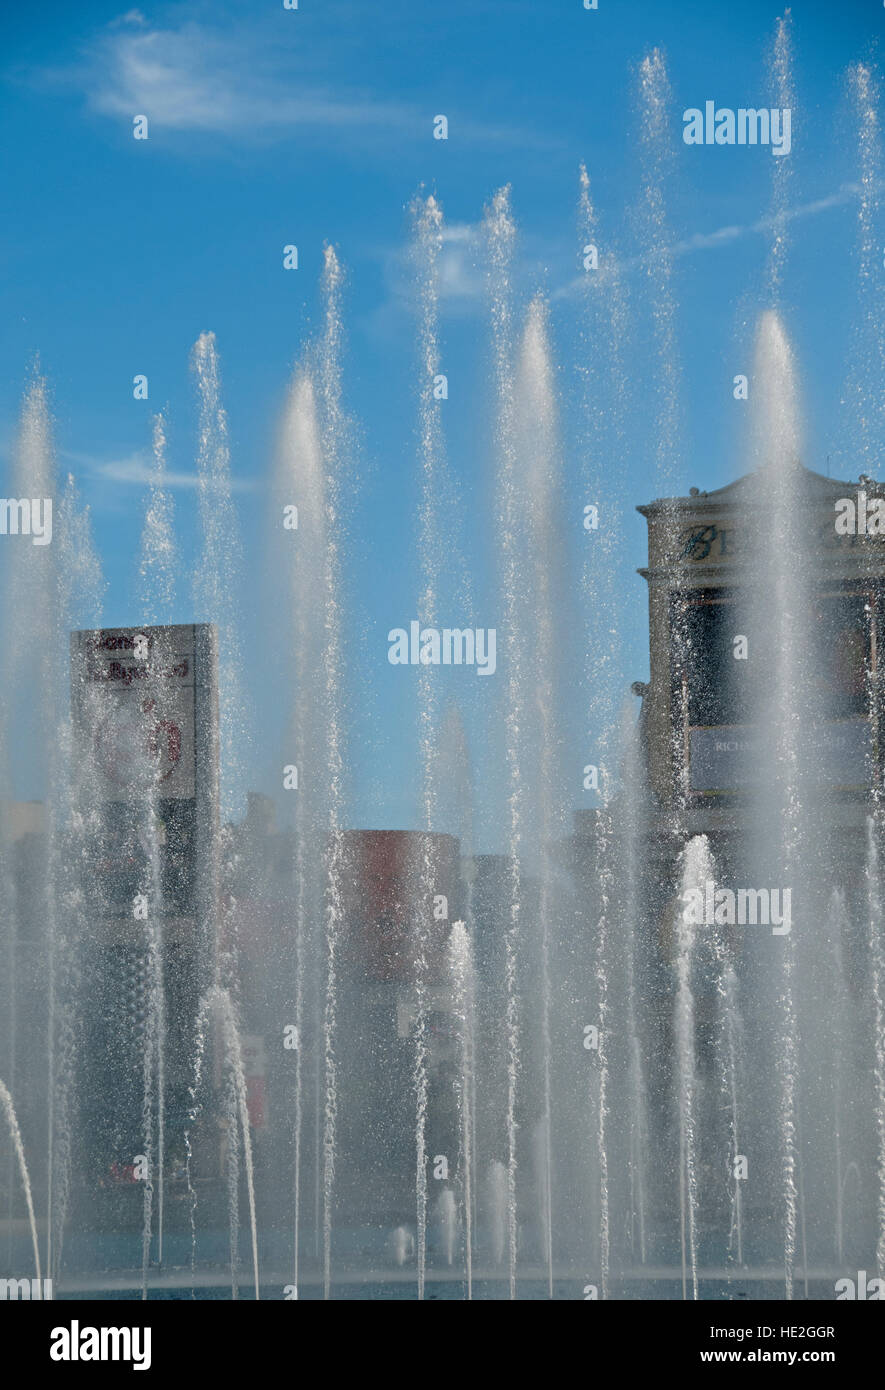 The fountains of Bellagio, a casino and hotel on The Strip in Las Vegas, Nevada Stock Photo